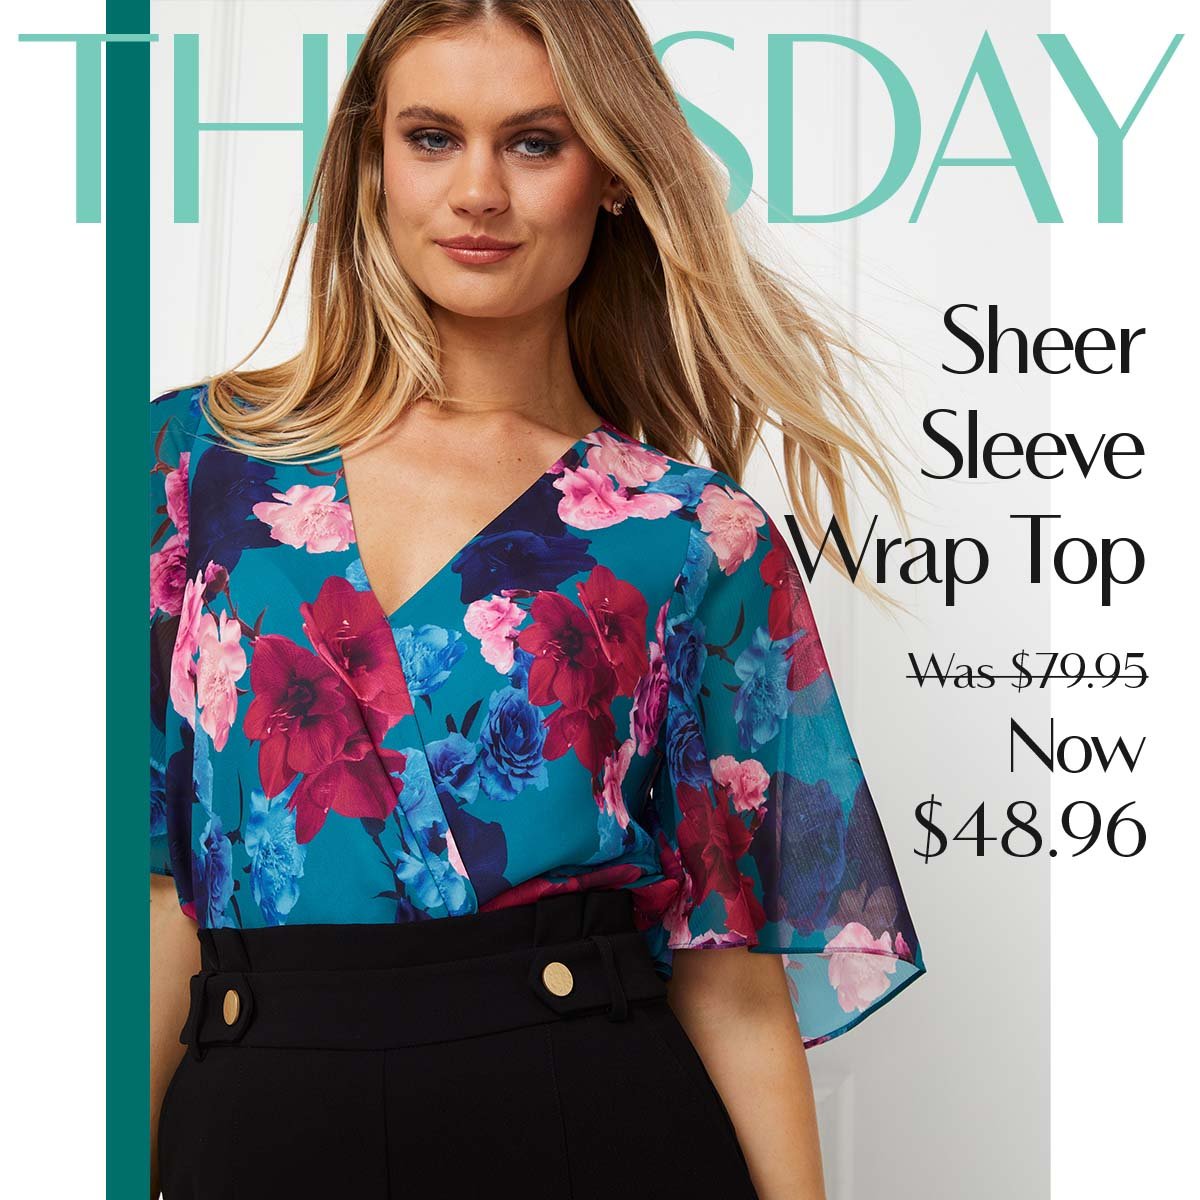 Thursday. Sheer Sleeve Wrap Top Was $79.95 Now $48.96